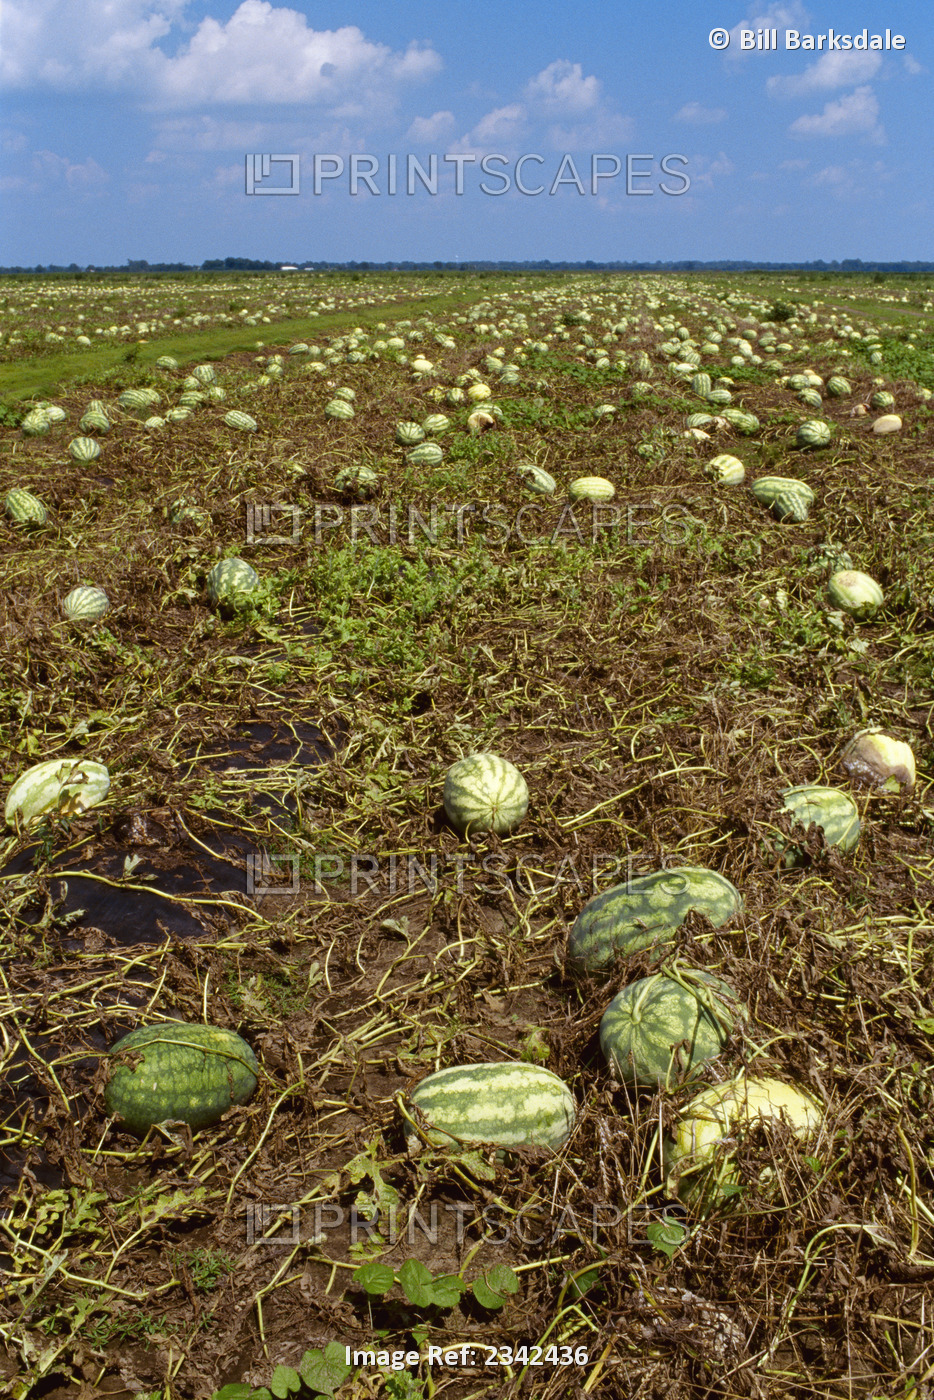 Agriculture - Watermelon crop ruined by a prolonged spell of rainy weather. ...